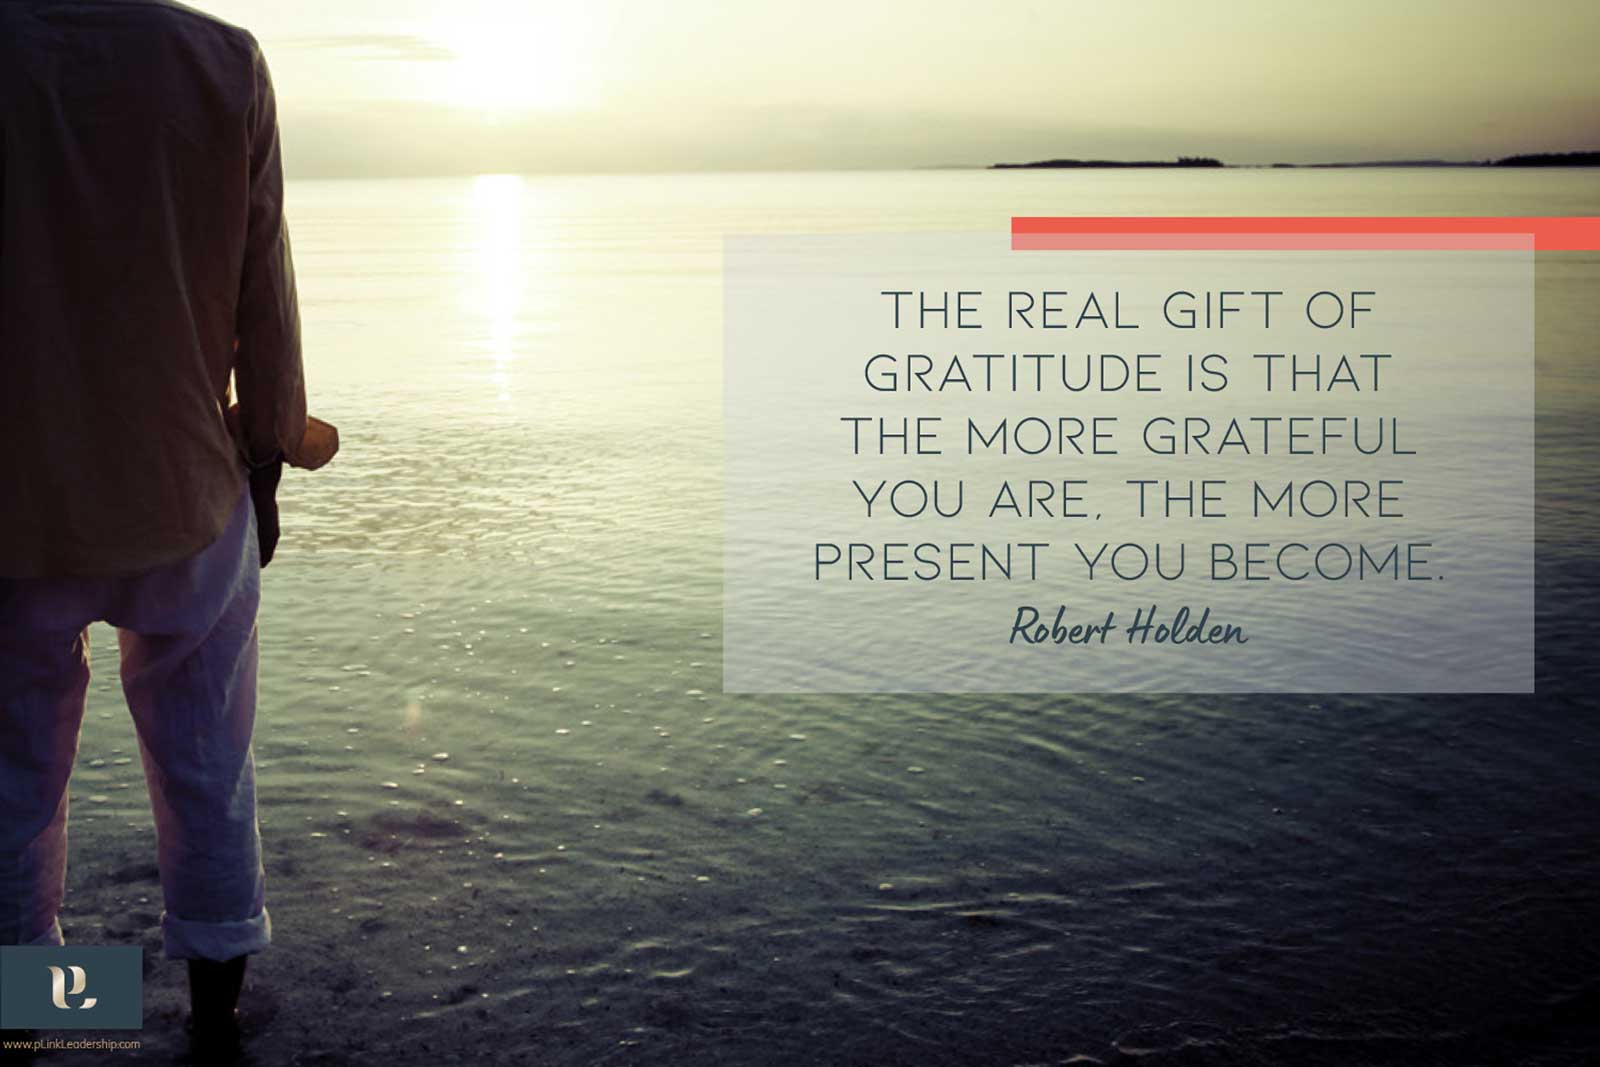 Inspirational - The real gift of gratitude is that the more grateful you are, the more present you become - Robert Holden